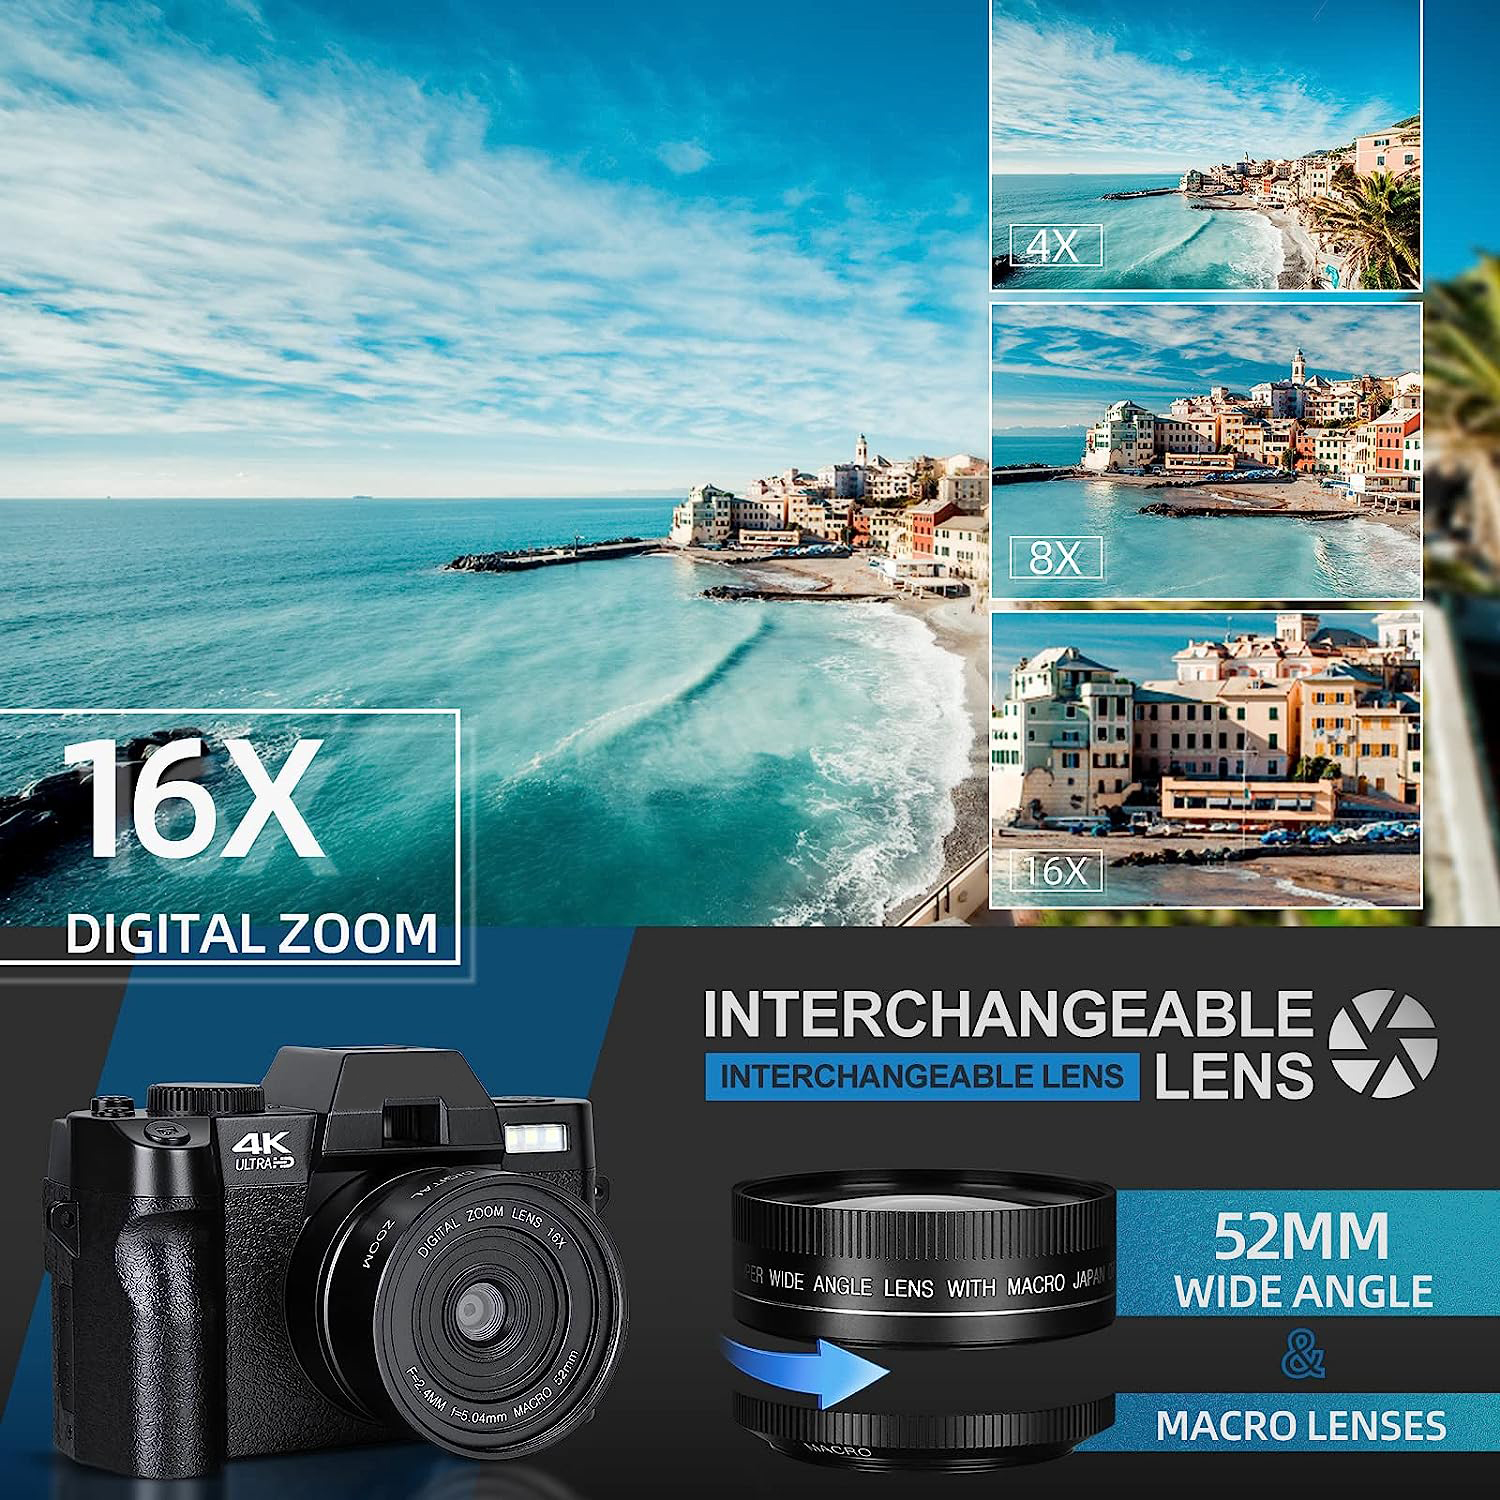 NBD Digital Camera 4K Ultra HD 48MP All-in-One Vlogging Camera with Wide Angle Lens, Digital Zoom 16x and 3" Screen - image 2 of 6